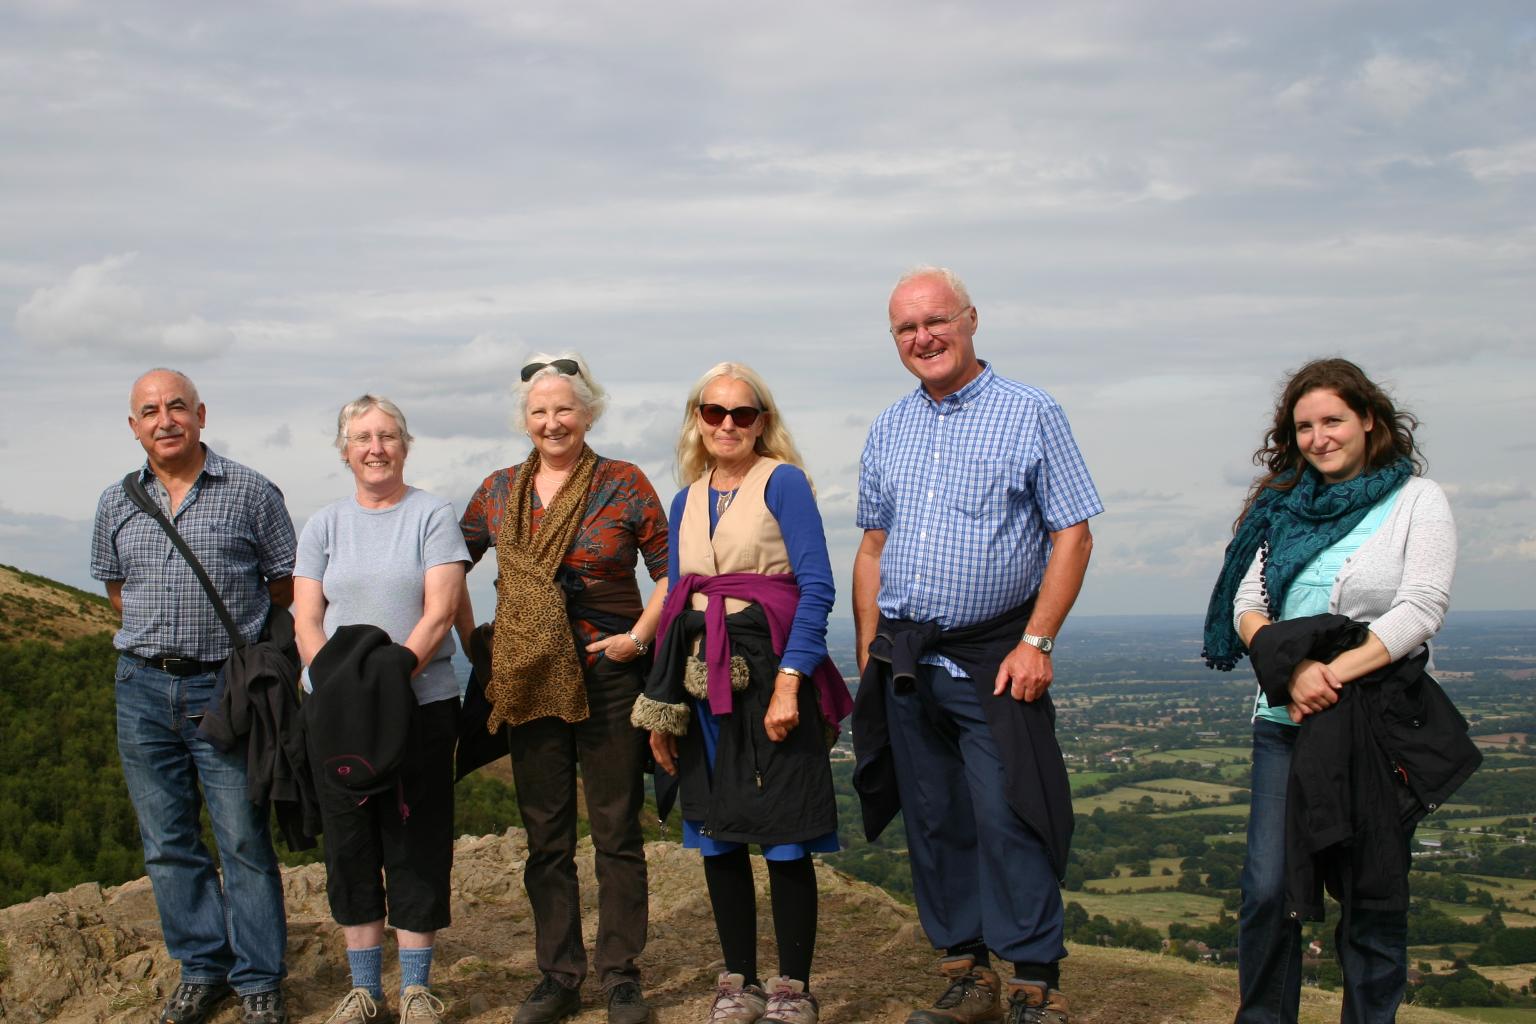 Sunday 24th August, afternoon on the Malvern Hills.